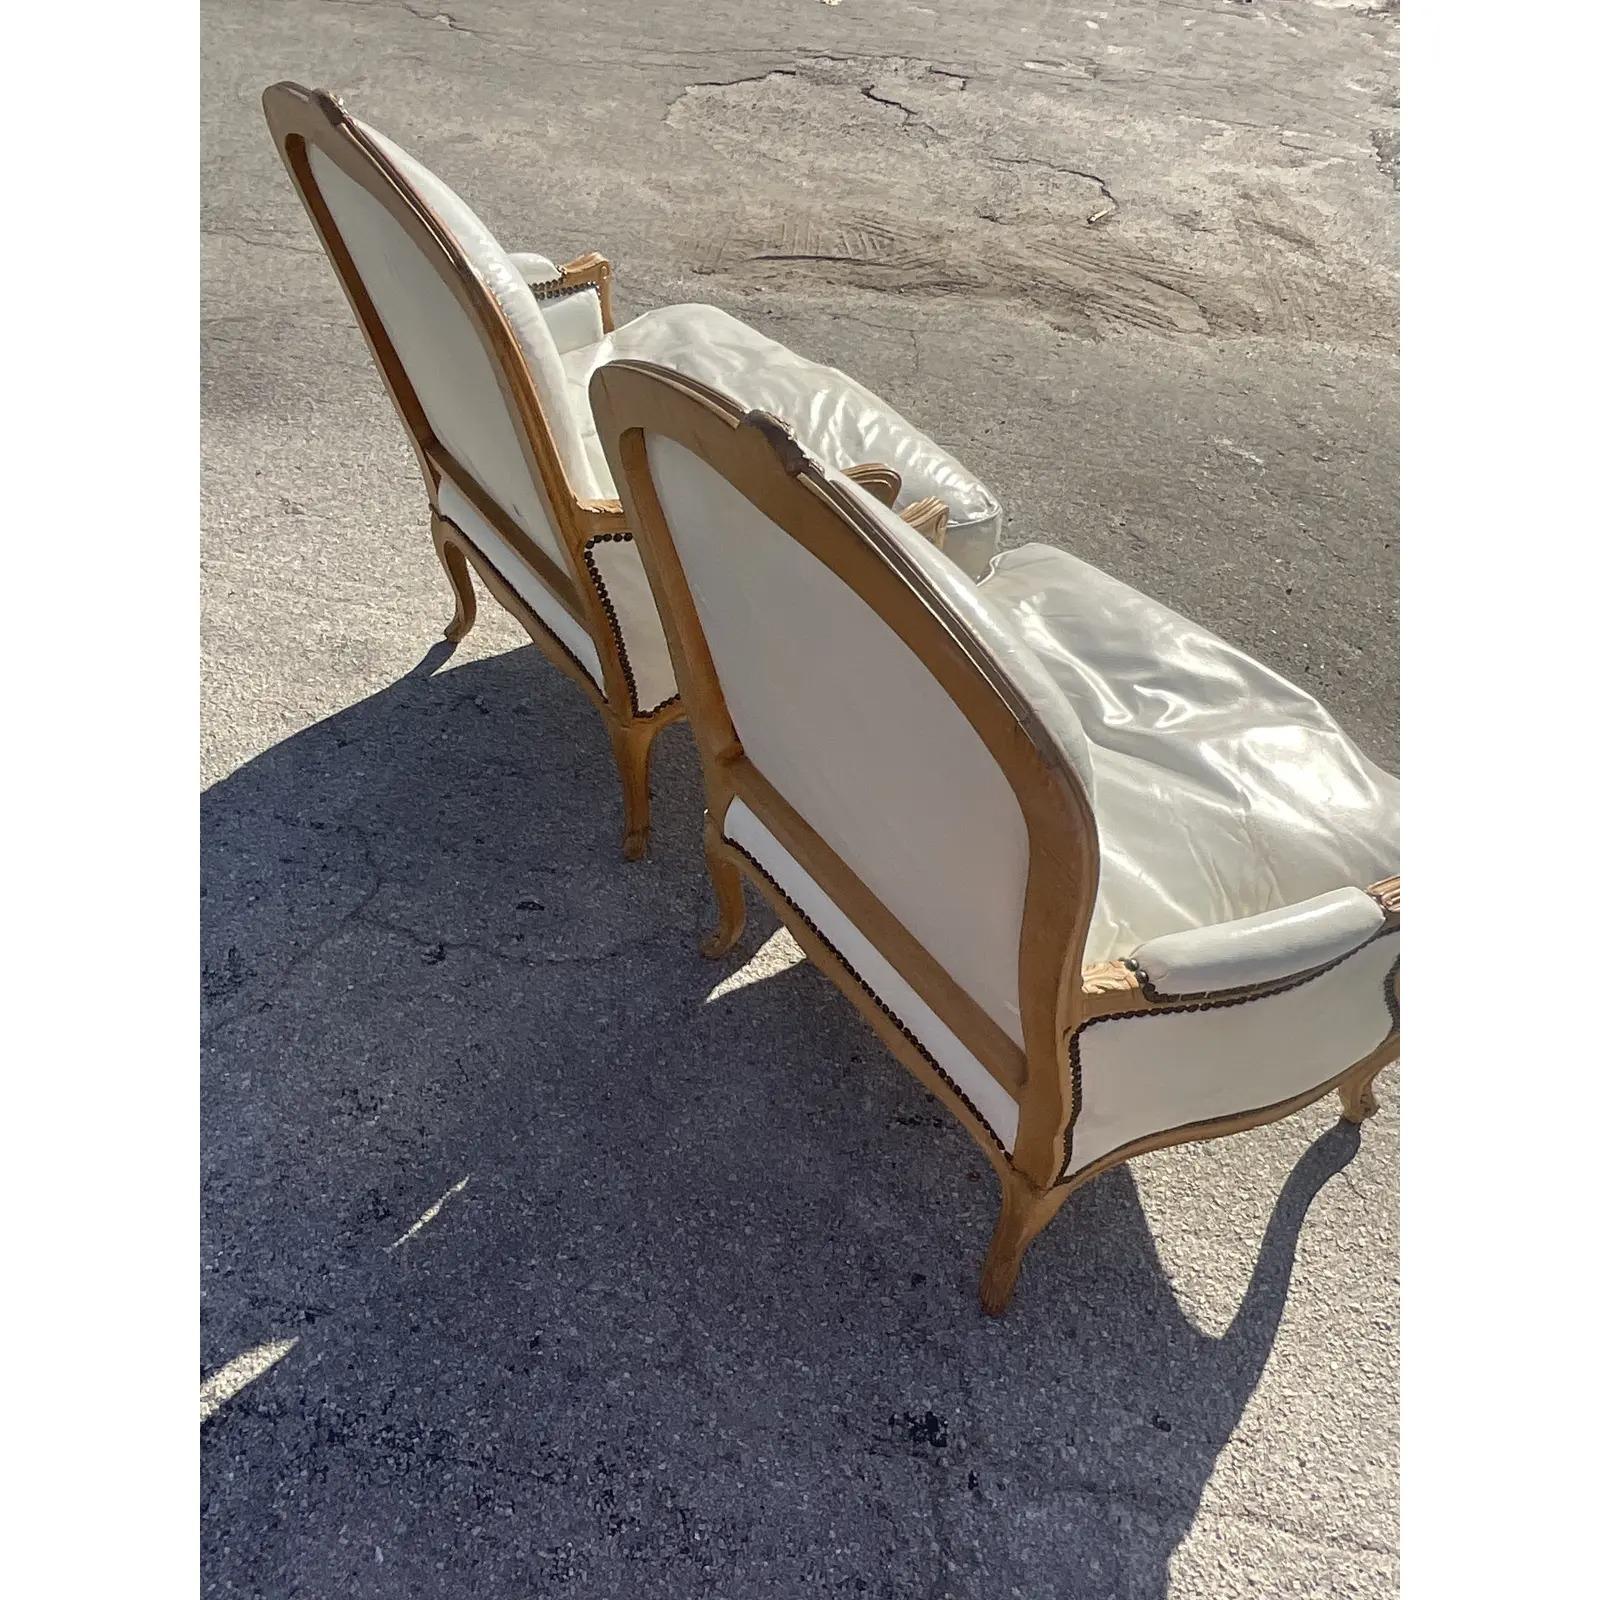 North American Vintage Boho John Dickinson White Leather Bergere Chairs - a Pair For Sale